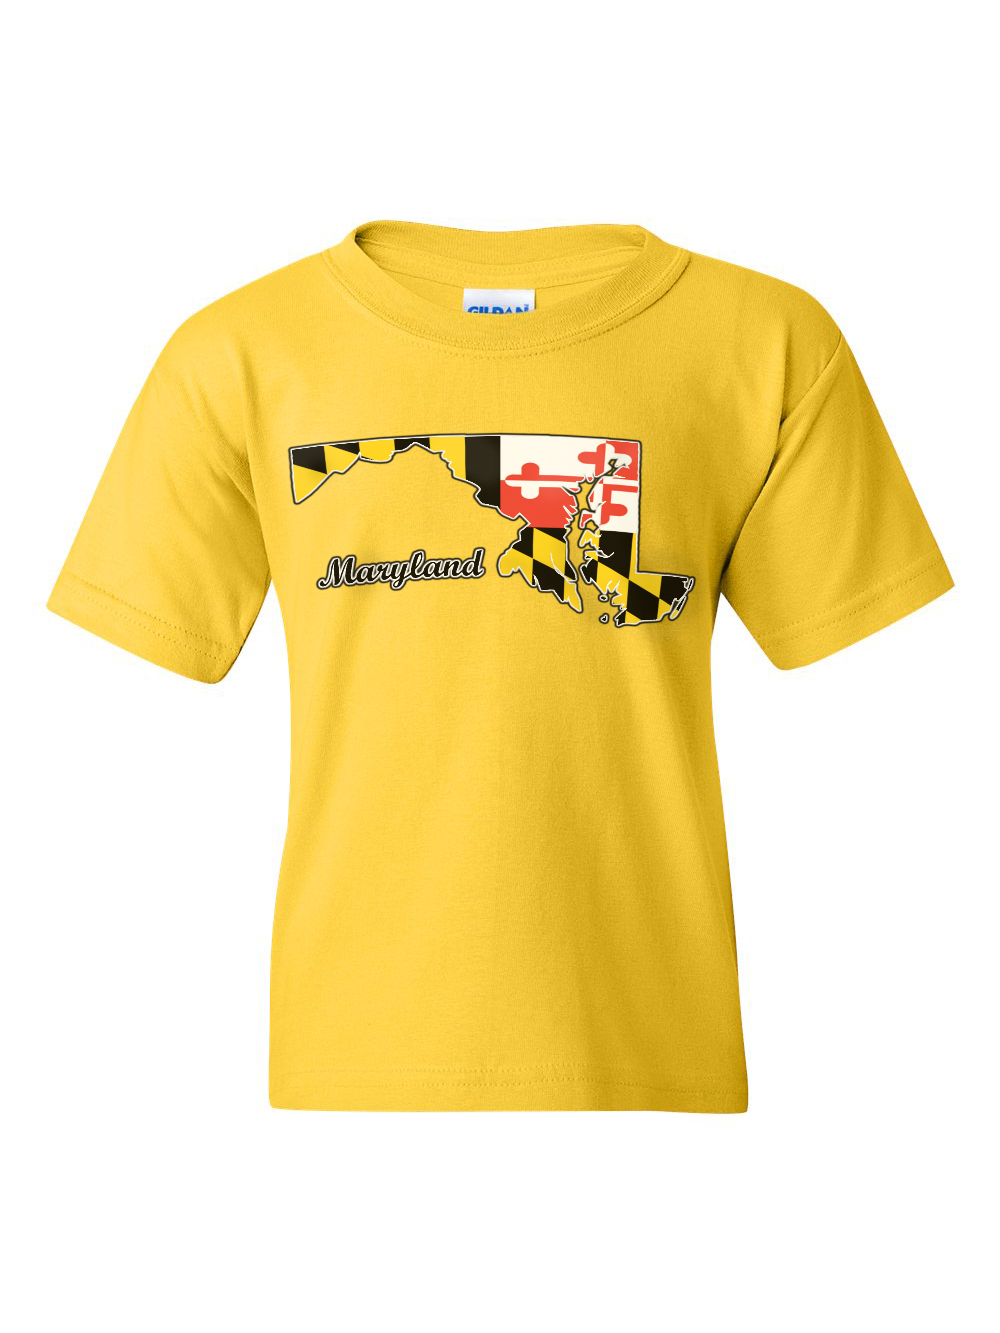 maryland-flag-state-silhouette-youth-t-shirt-yellow